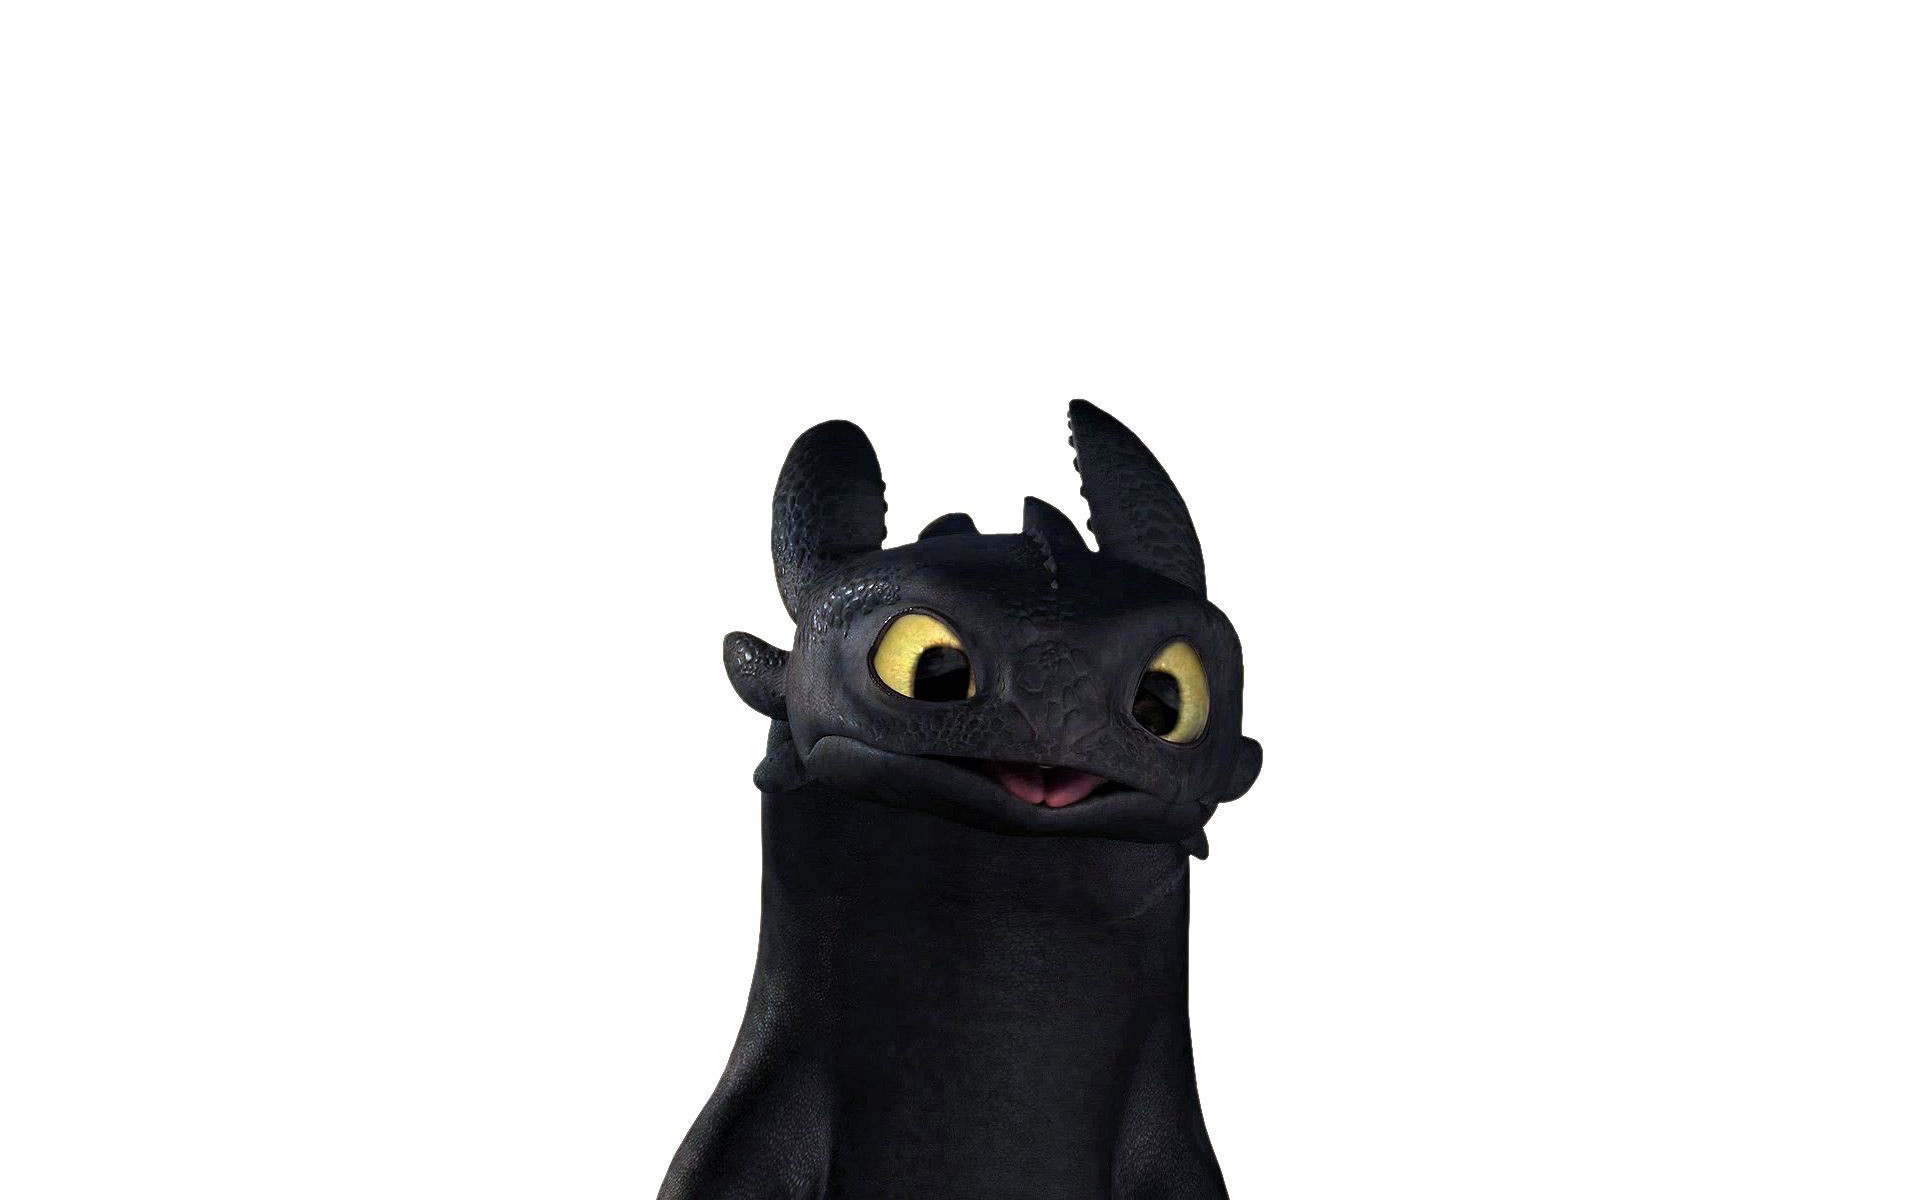 Toothless How To Train Your Dragon Hd Wallpaper 1920x1200 1920x1200